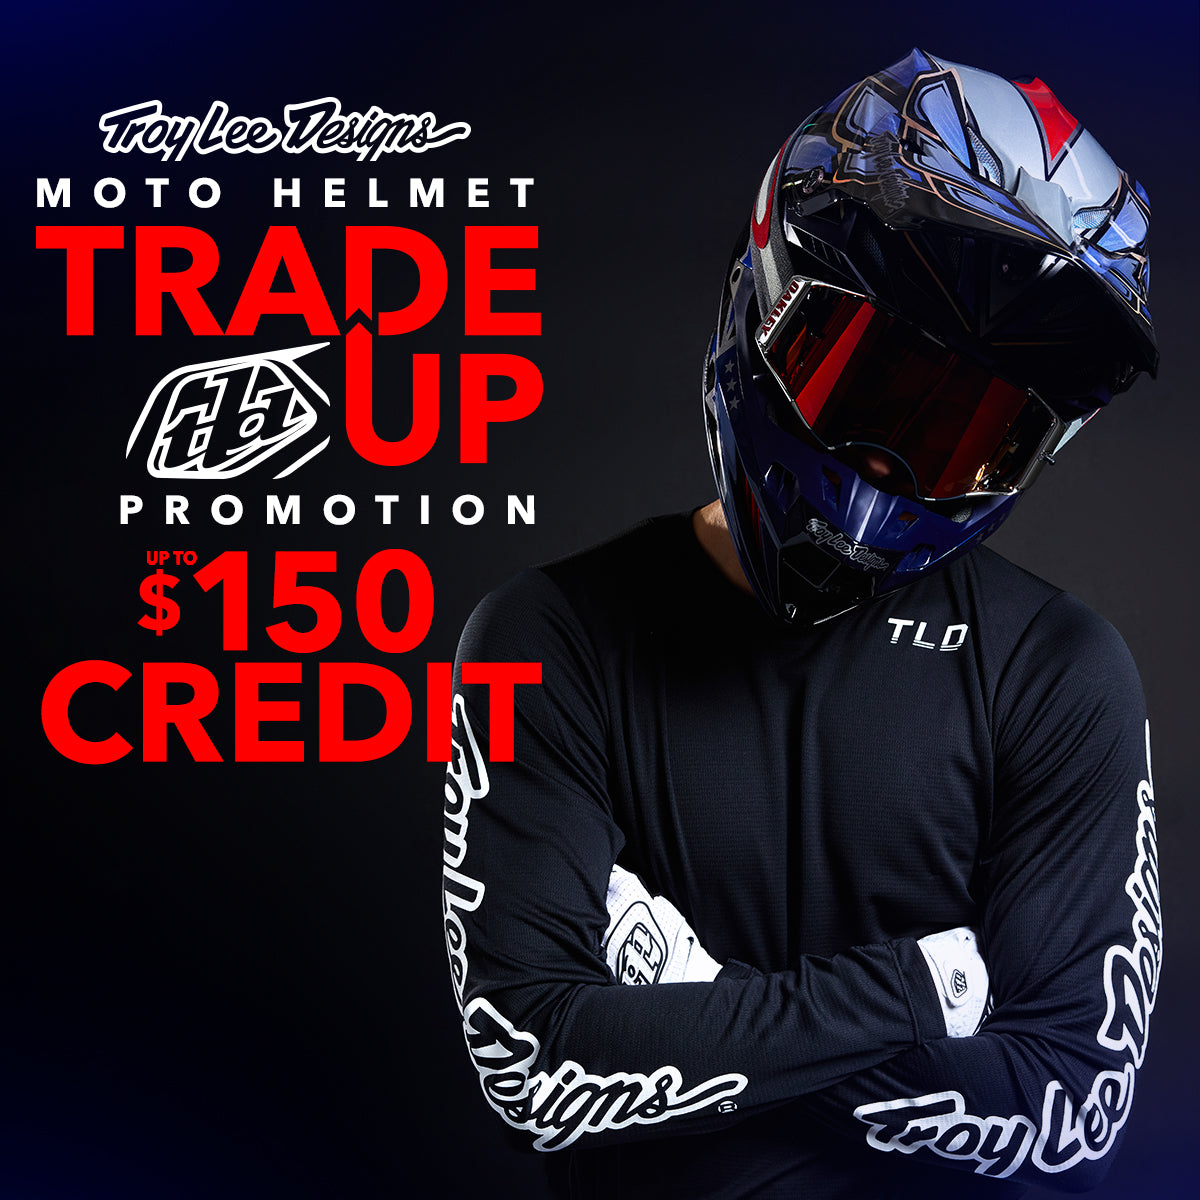 Moto Helmet Trade up call to action image